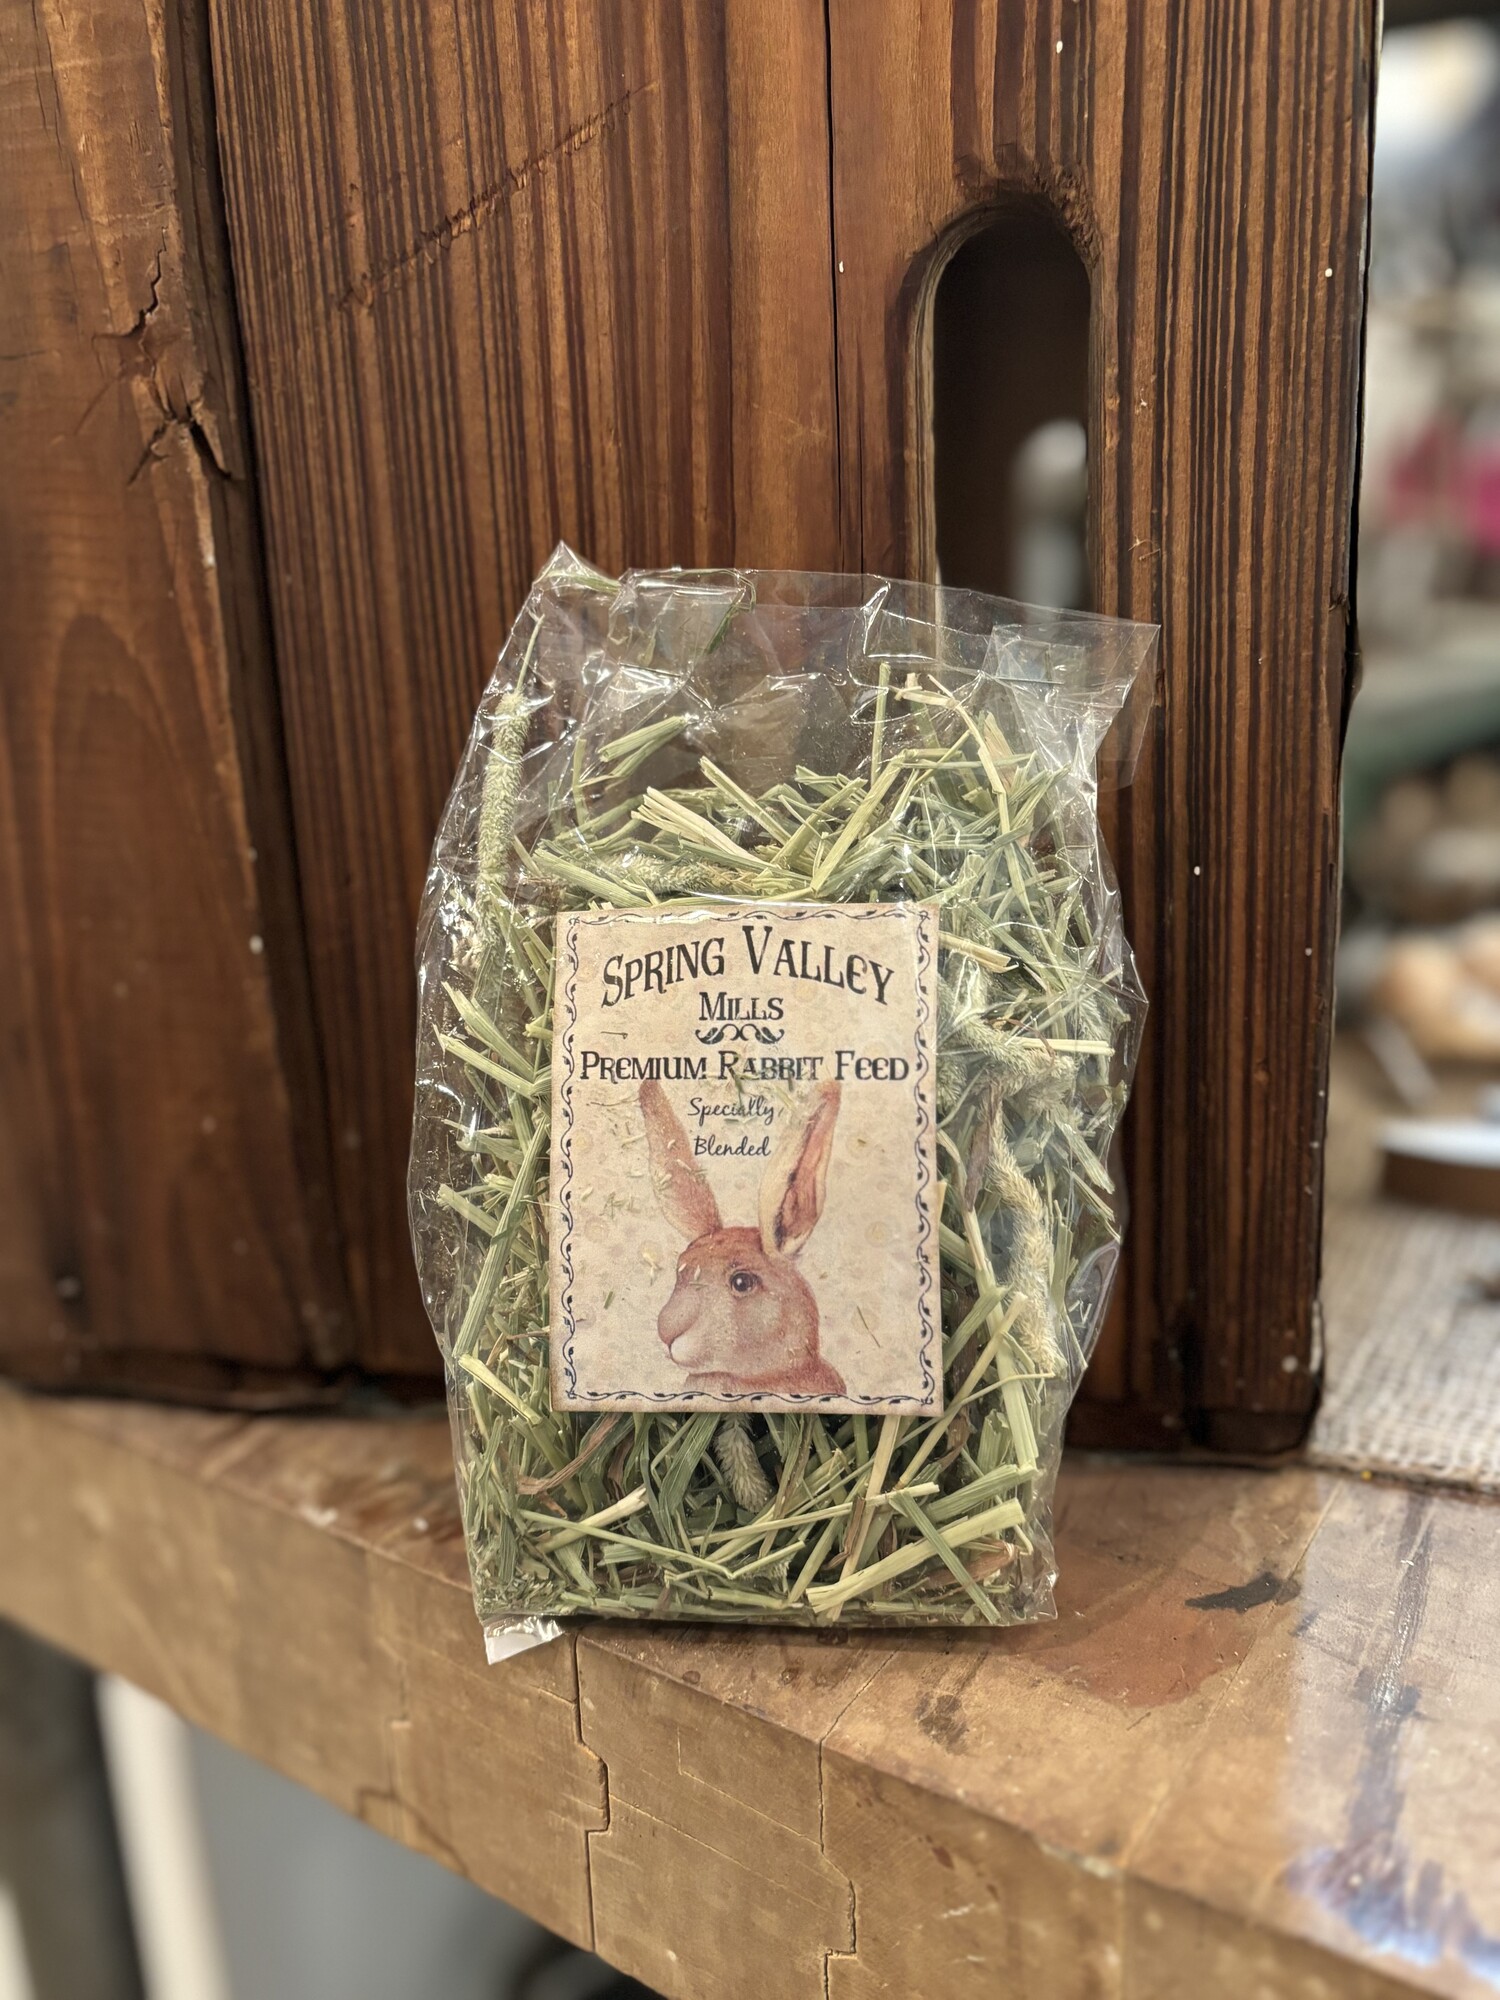 This bag of Rabbit Grass looks great placed in wooden bowls or baskets and makes a fun alternative to traditional grasses .